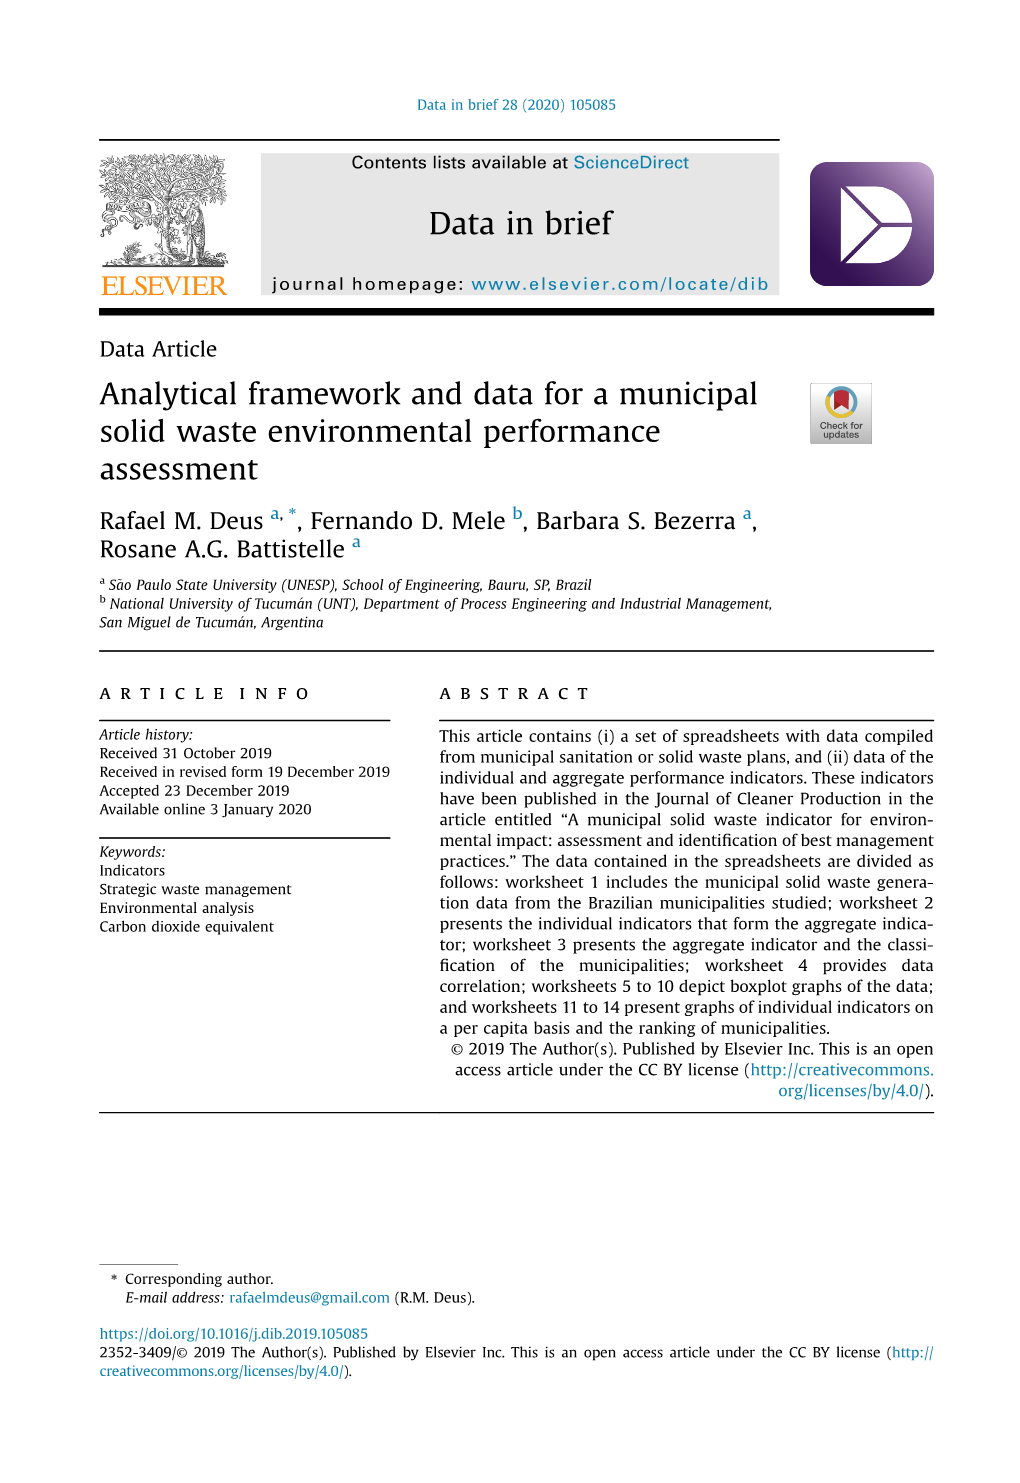 Analytical Framework and Data for a Municipal Solid Waste Environmental Performance Assessment